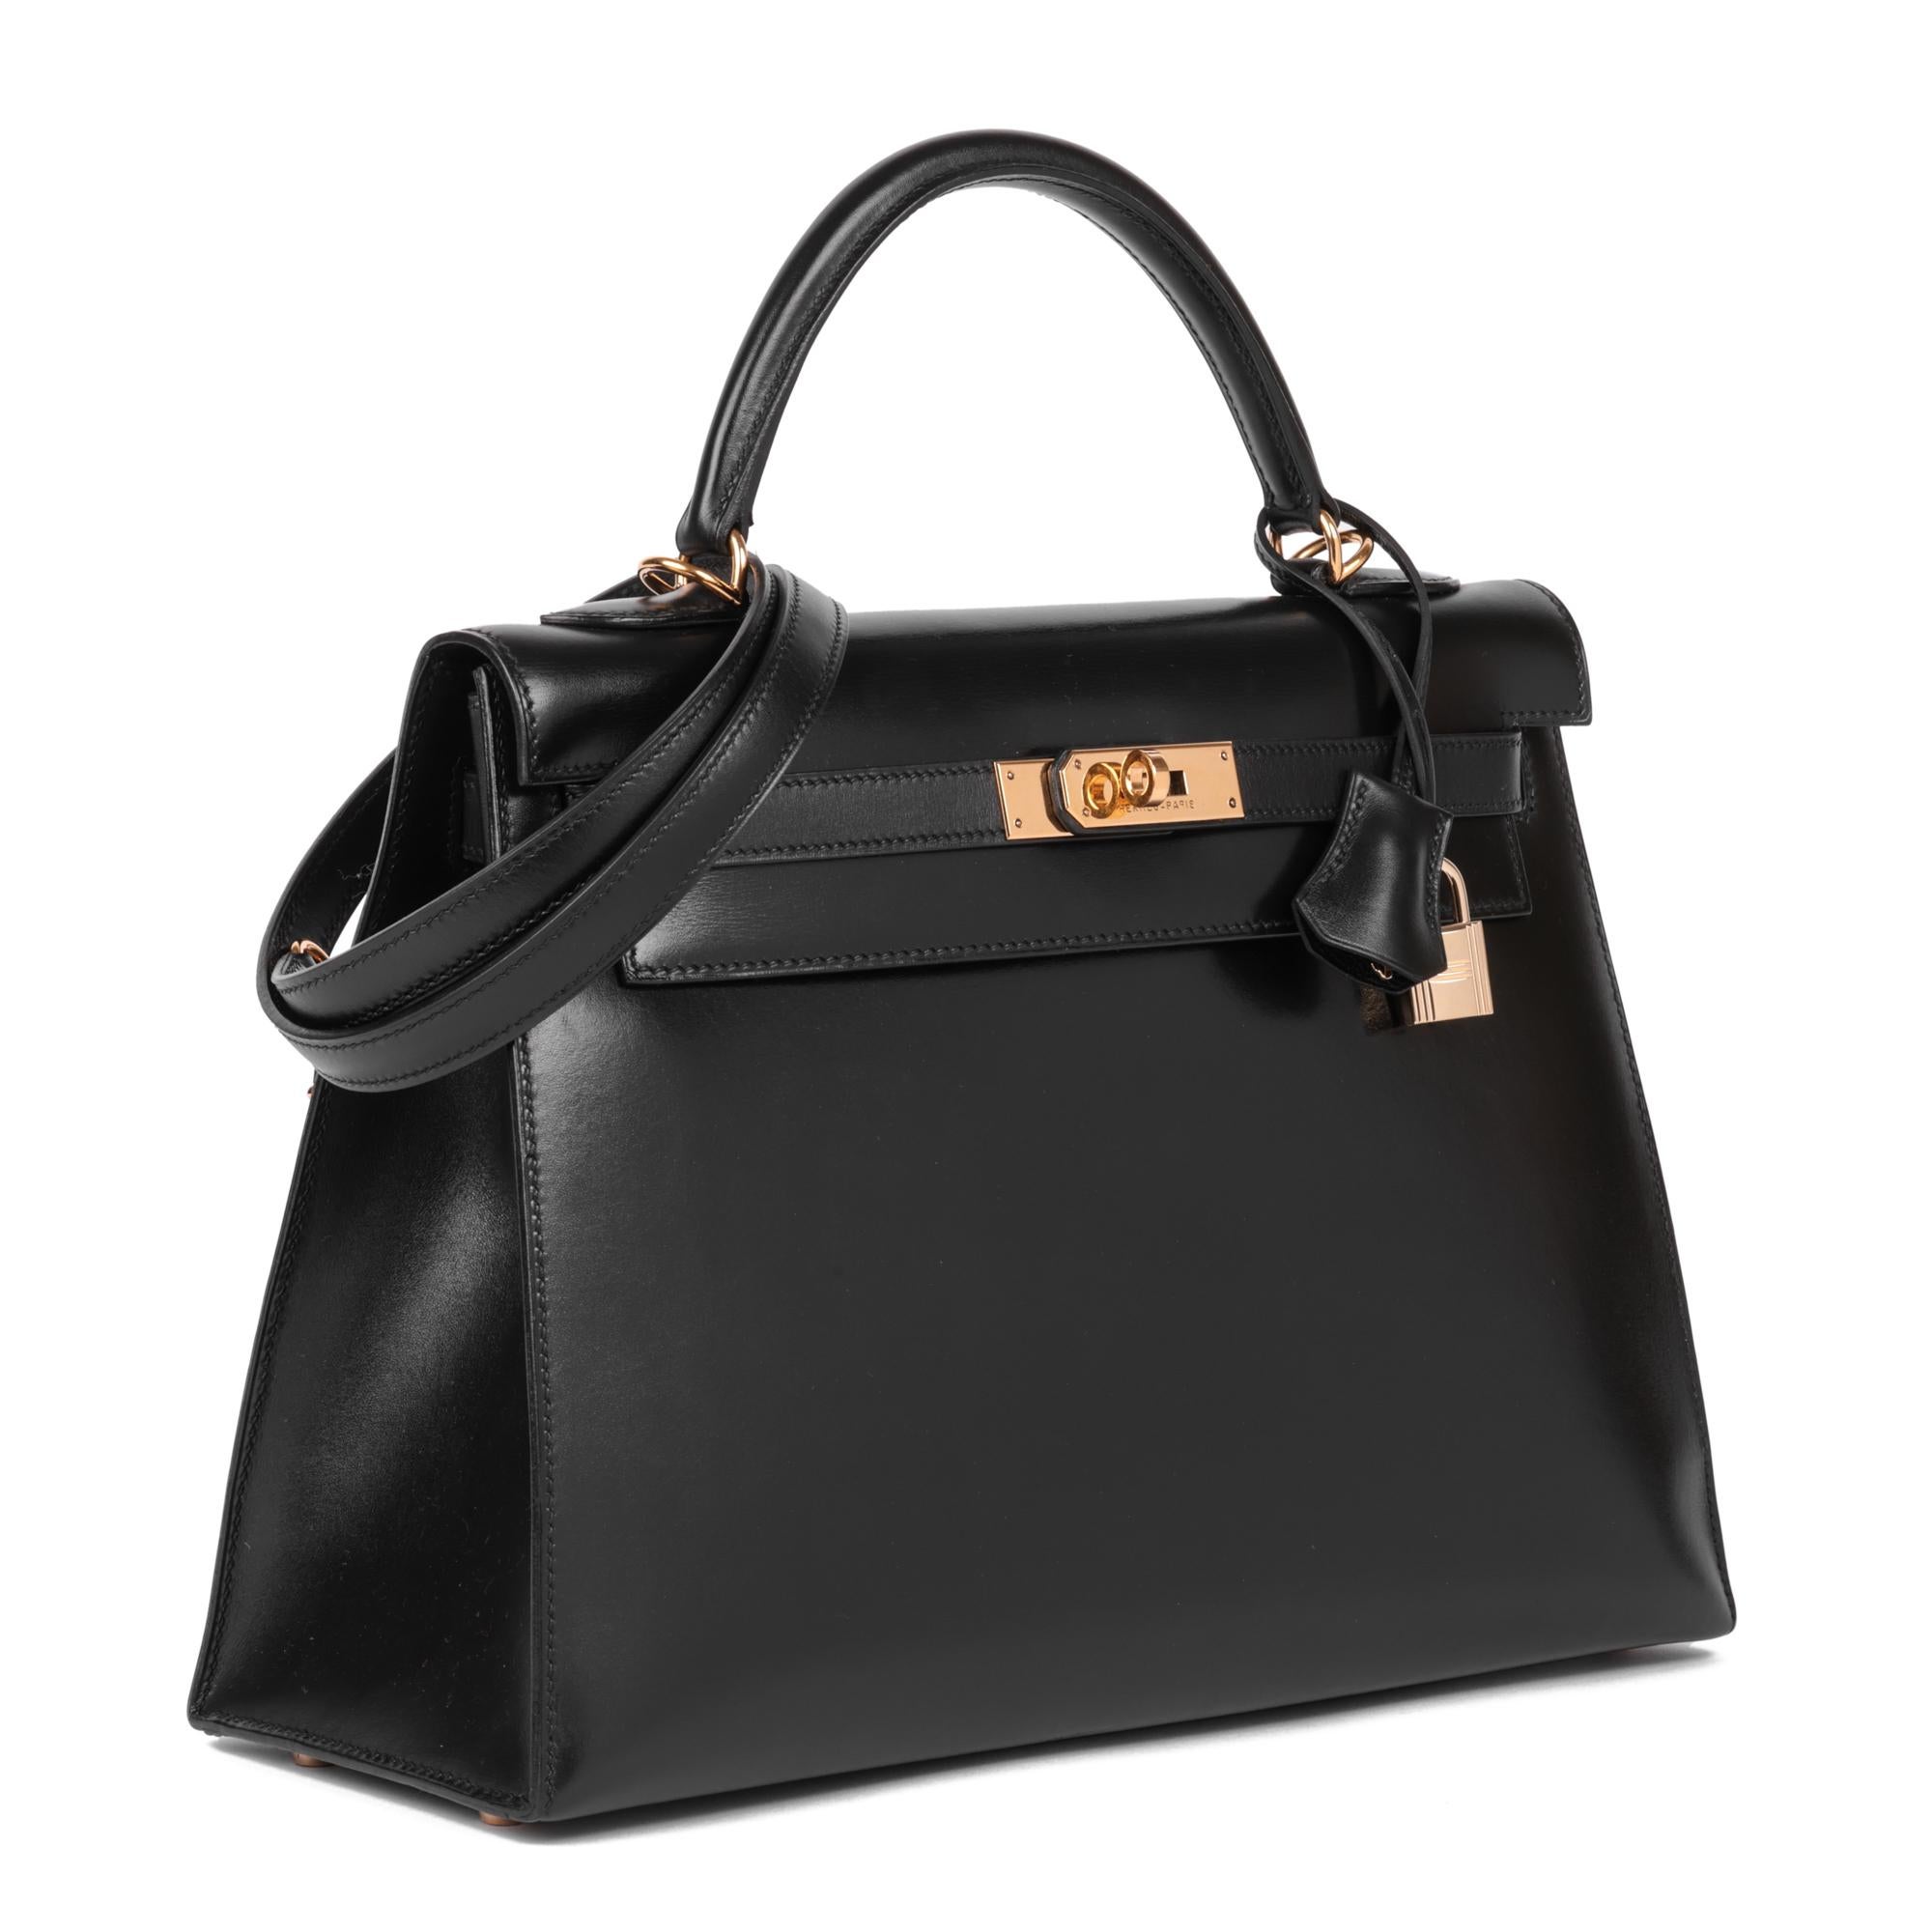 Hermès Black Box Calf Leather Vintage Kelly 32cm

CONDITION NOTES
The exterior is in excellent condition with light signs of use.
The interior is in excellent condition with light signs of use.
The hardware is in very good condition with light signs